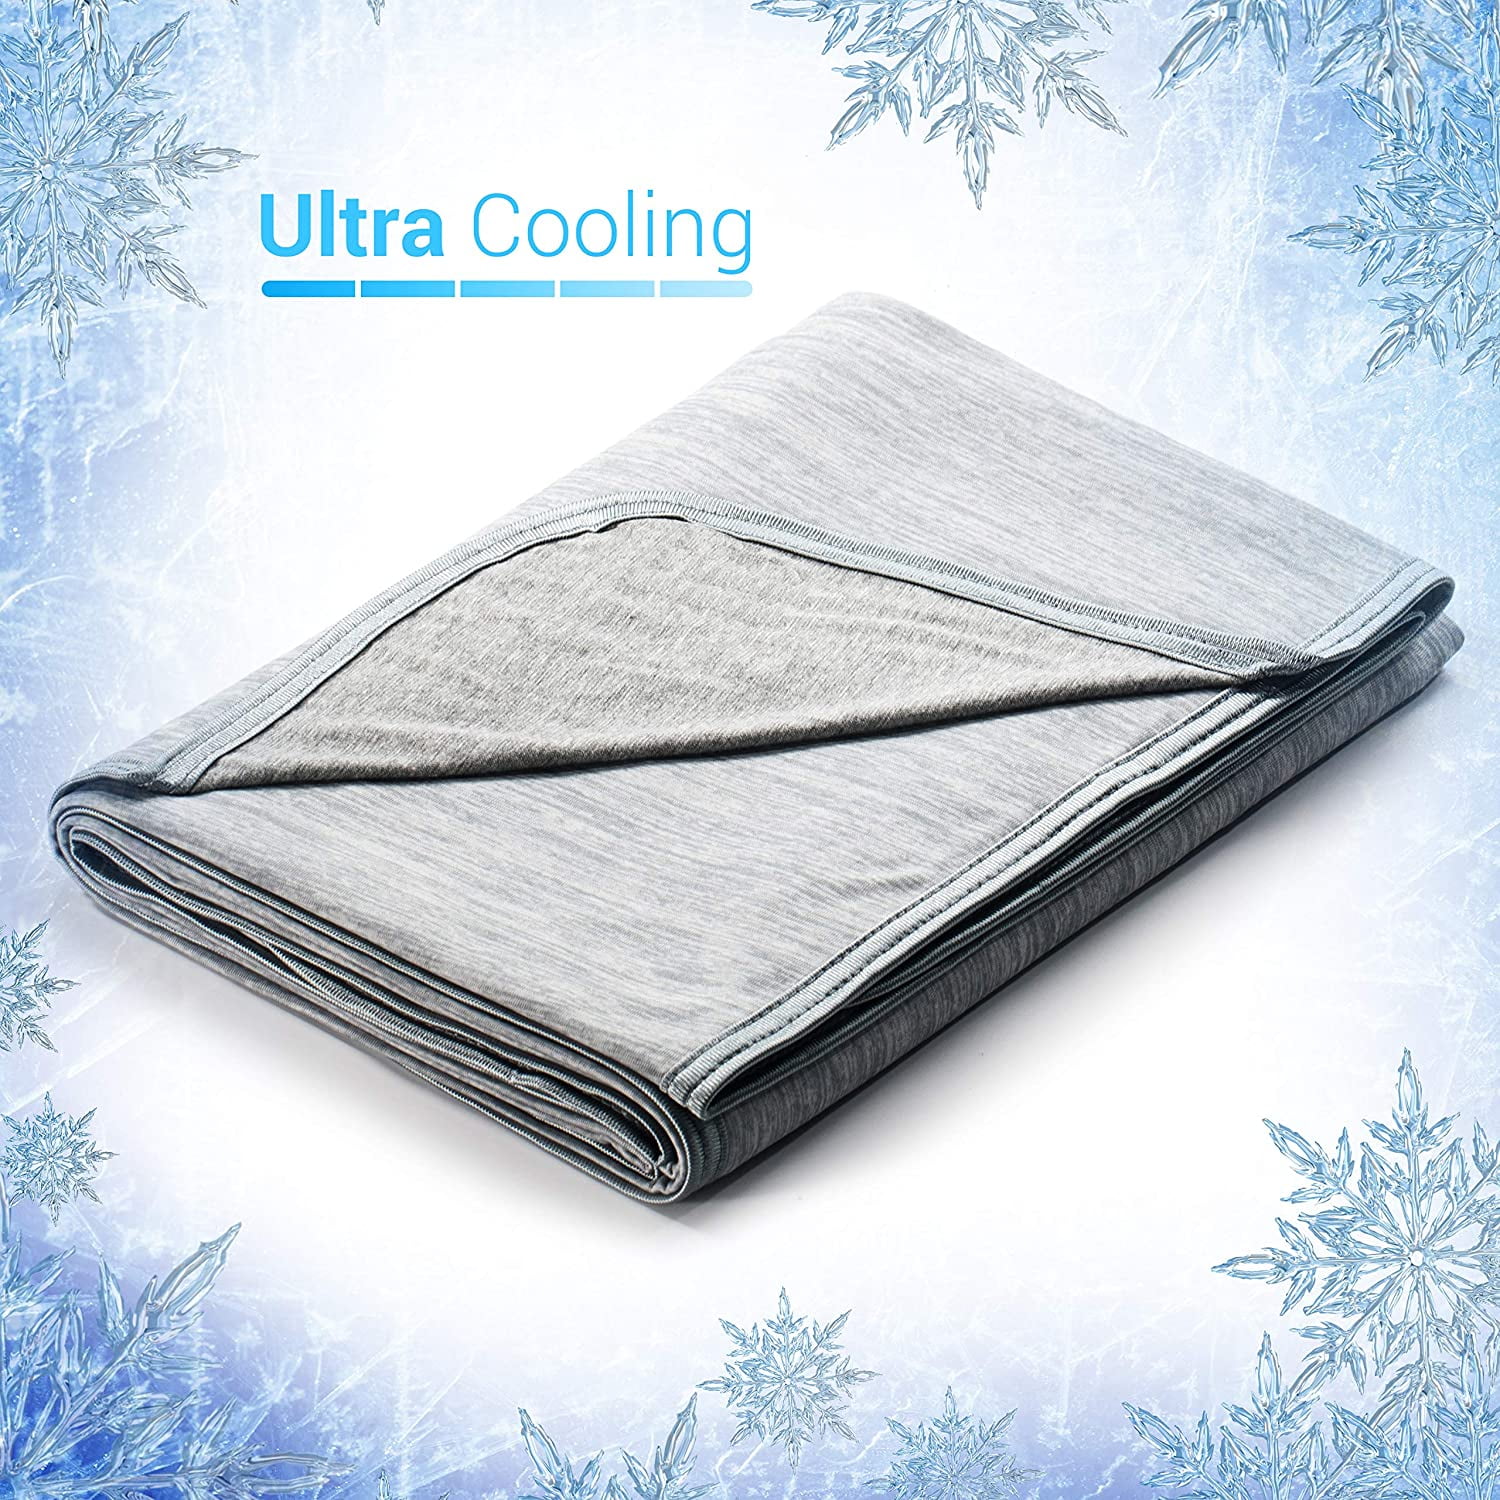 Elegear Revolutionary Cooling Blanket Absorbs Heat to Keep Adults,  Children, Babies Cool on Warm Nights. Japanese Q-Max 0.4 Cooling Fiber,  100% Cotton 